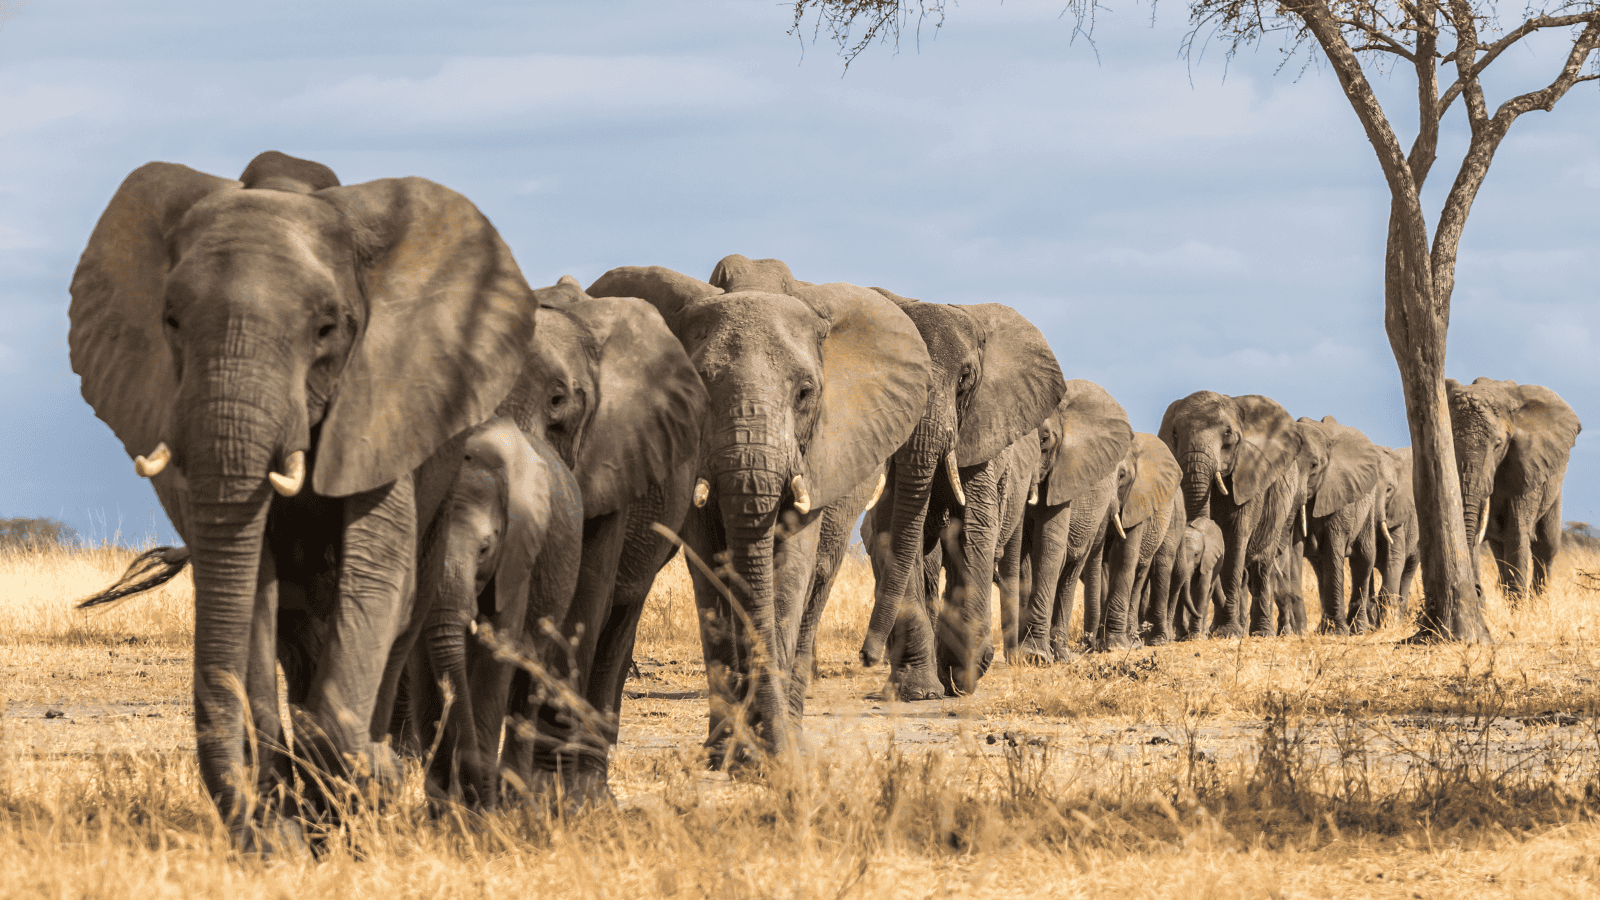 <p>Gear up for a memorable <a href="https://whatthefab.com/african-safari.html" rel="follow">African safari</a> down the Chobe River. Chobe National Park in Botswana is a top vacation spot for thrill-seekers. A two-night trip on the <a href="https://www.chobe.com/zambezi-queen.php" rel="nofollow external noopener noreferrer">Zambezi Queen</a> will help you unwind in luxury and reconnect with nature. </p><p>The Zambezi Queen more closely resembles a hotel-on-water than a boat. Every aspect, from the spacious rooms to the plunge pool, contributes to the ship’s serene and intimate atmosphere. Watch for herds of elephants, buffalo, and hippos from the Zambezi Queen’s open-air viewing decks.</p>